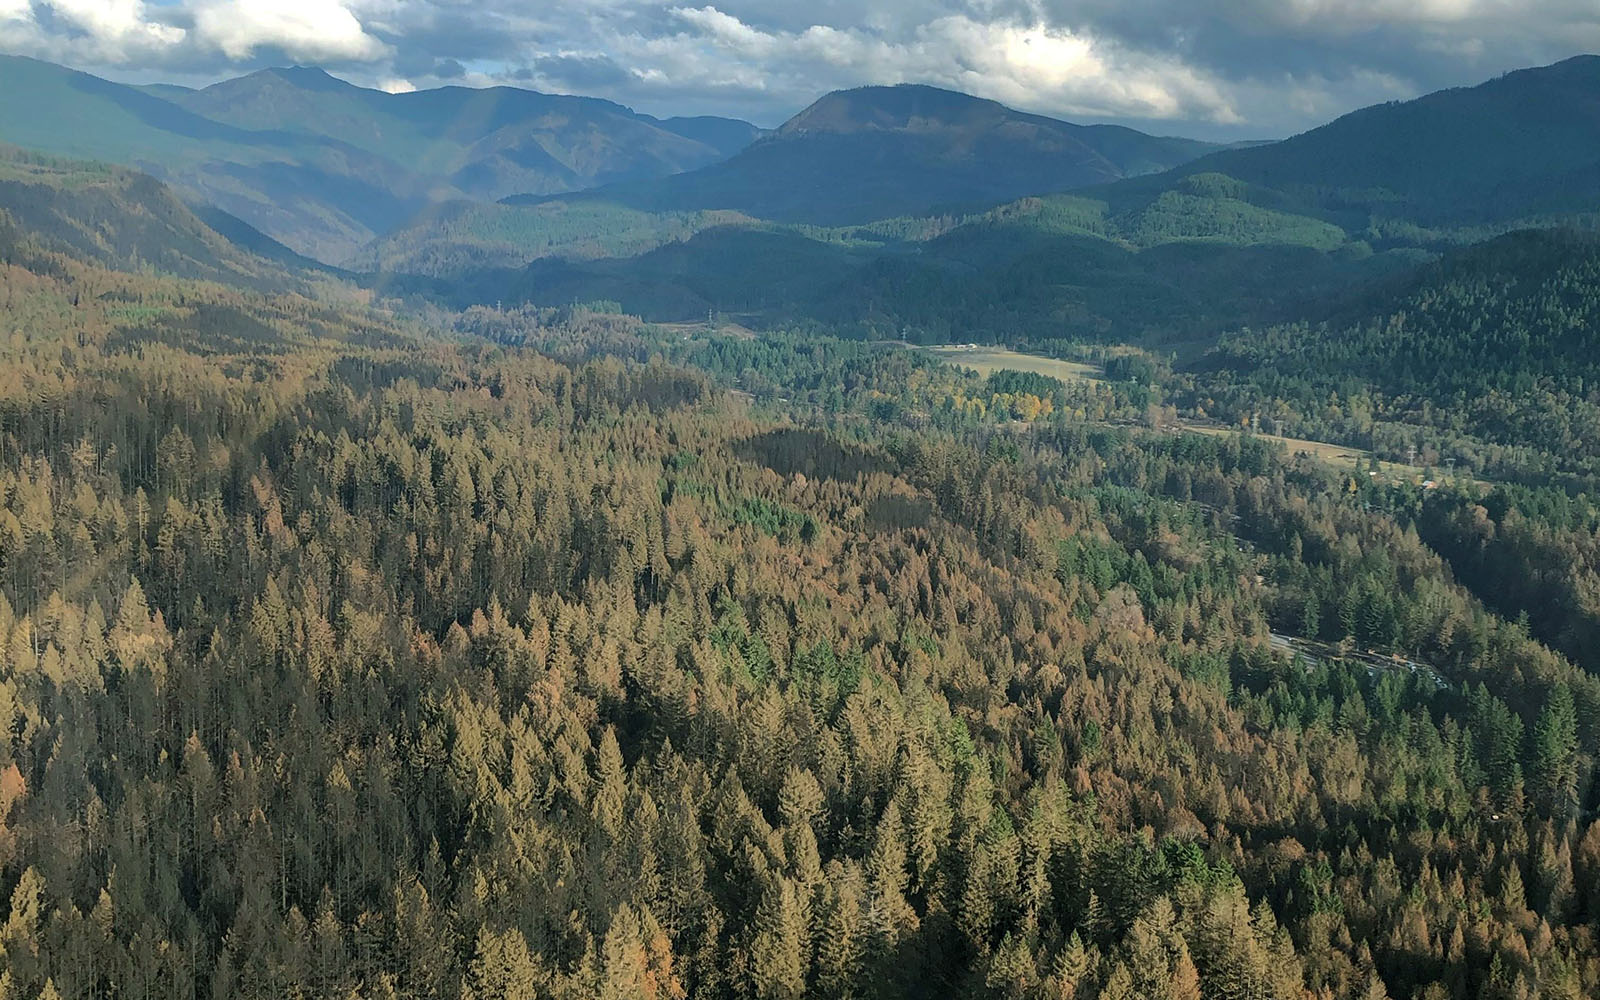 Victory: Post-fire Forests Reopening in Oregon